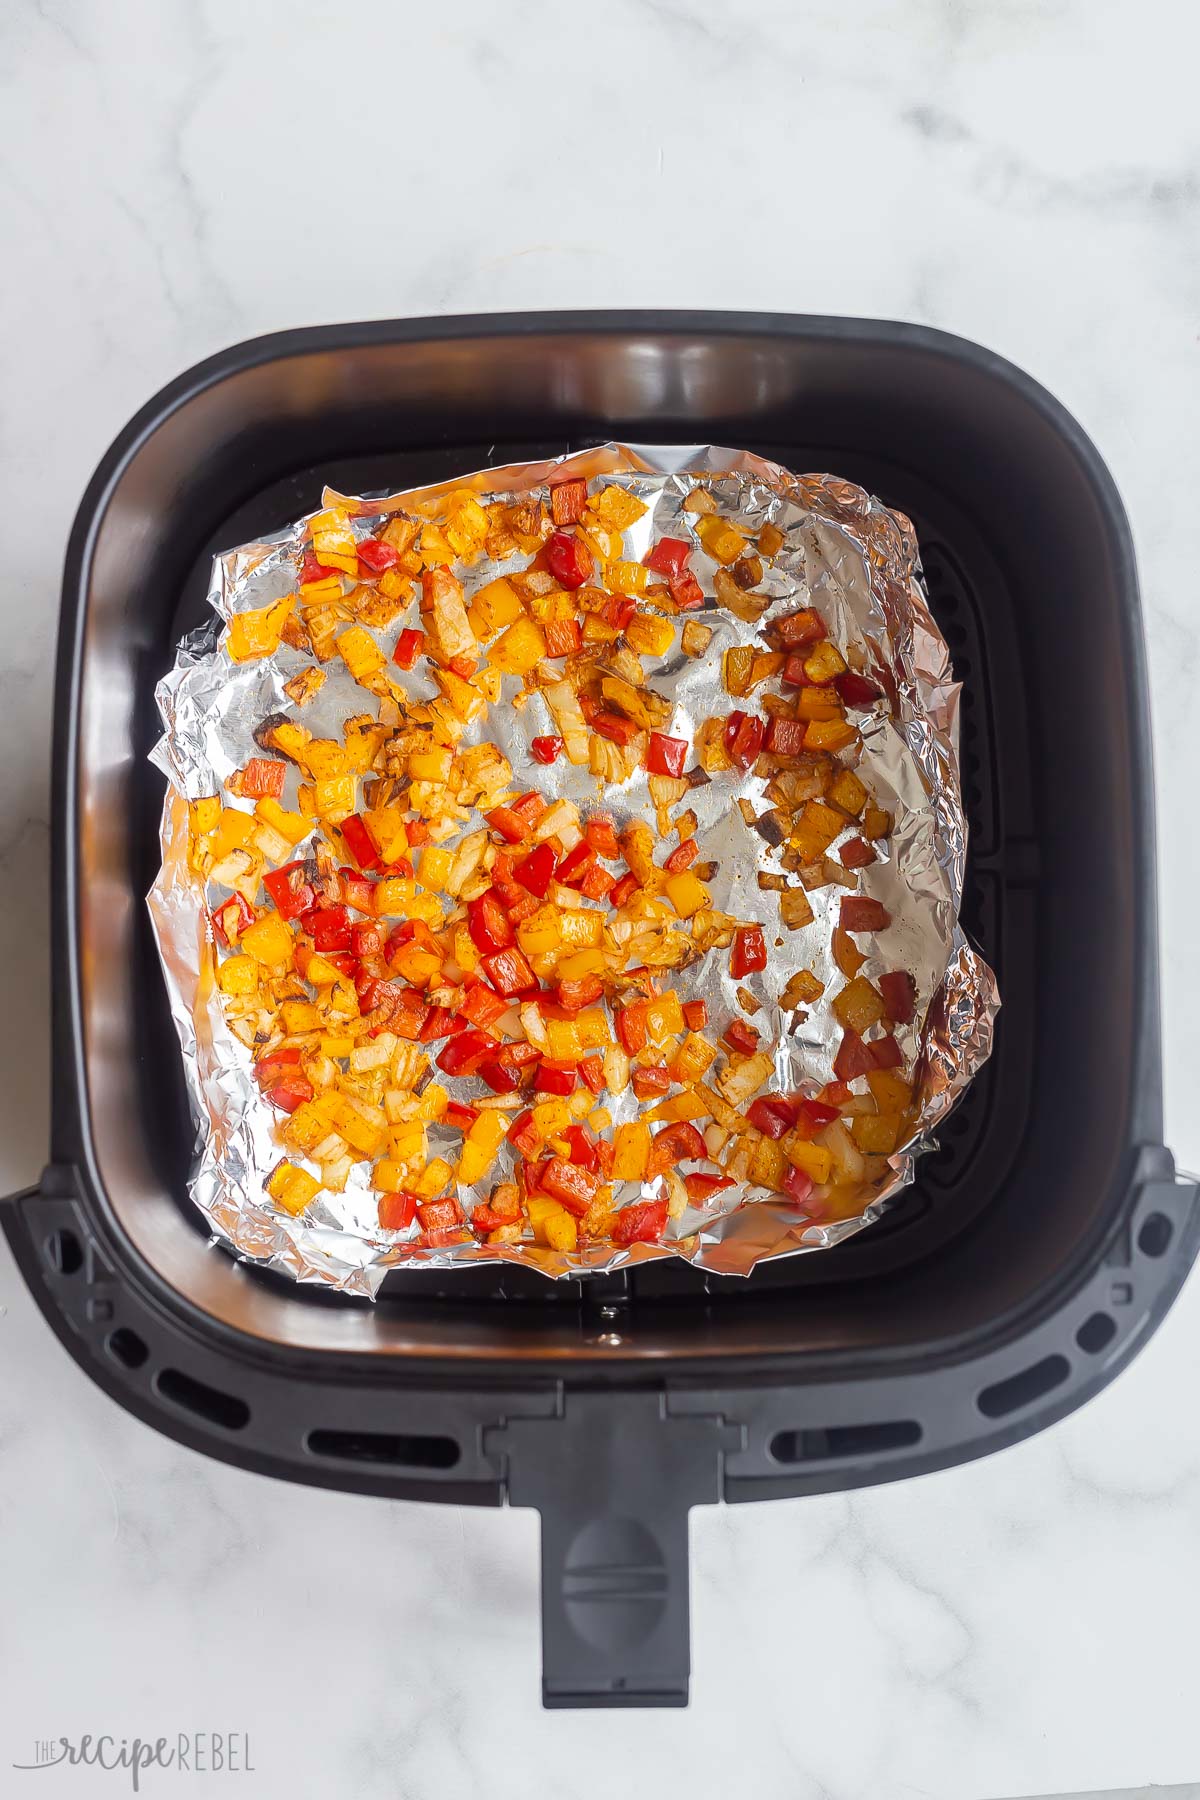 Sauteed red and yellow peppers on tinfoil in air fryer basket.